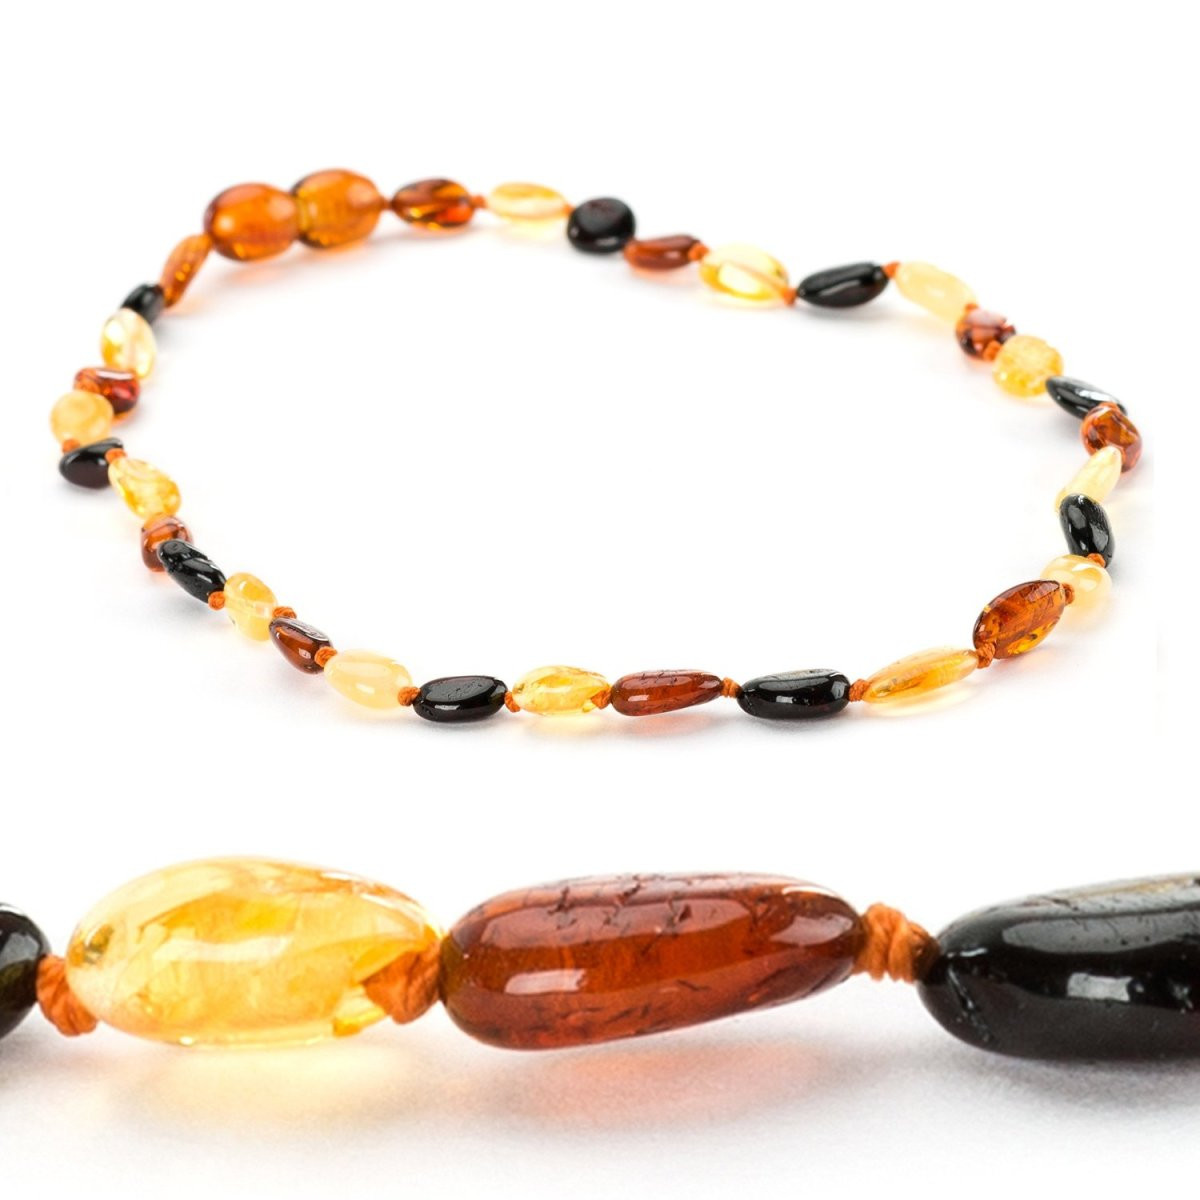 Amber Teething Necklace Review
 Product Review Baltic Amber Teething Necklace – The True